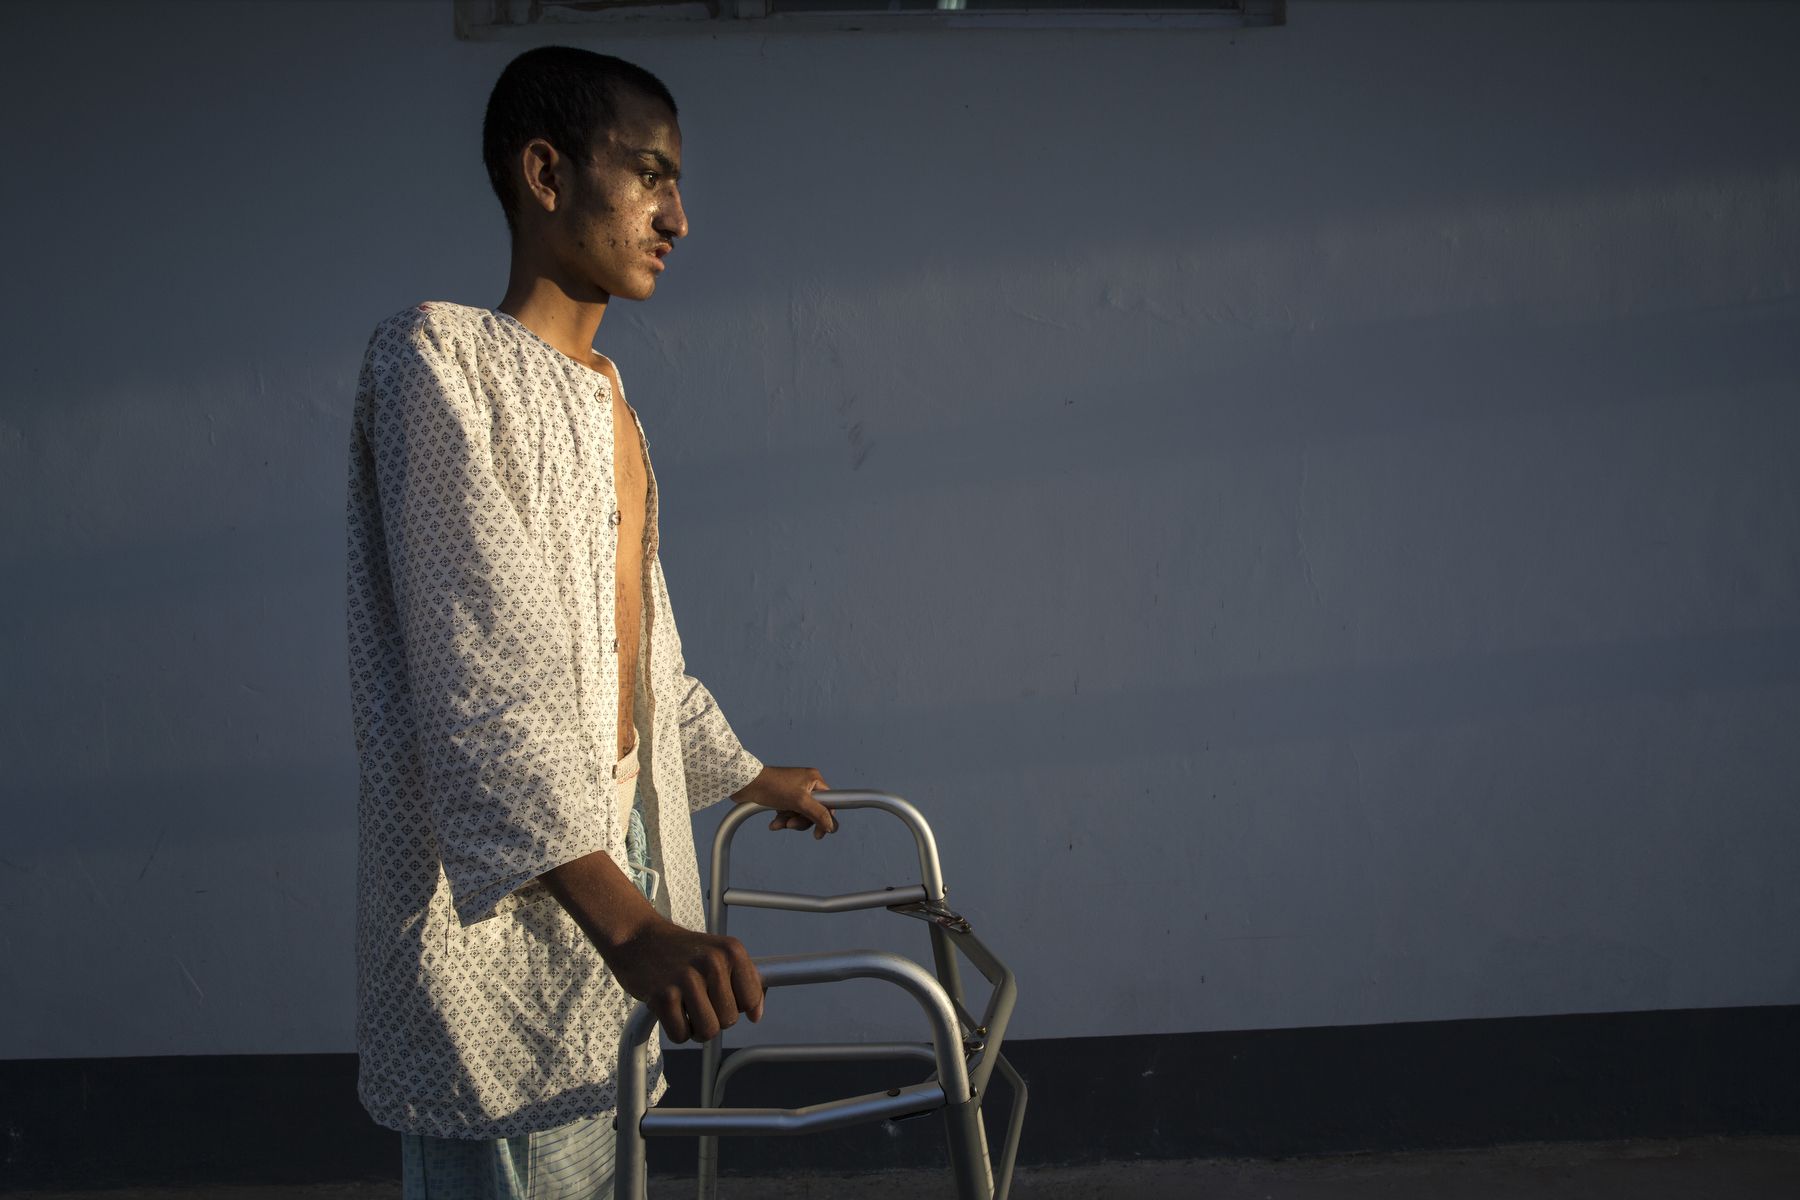 Ahah Kahn, 19, is barely able to walk after a serious brain injury caused by an IED. Atah was a sheep herder from Helmand who had been at the hospital for a month recovering his strength. Lashkar Gah, Afghanistan. Image by Paula Bronstein. Afghanistan, 2015.